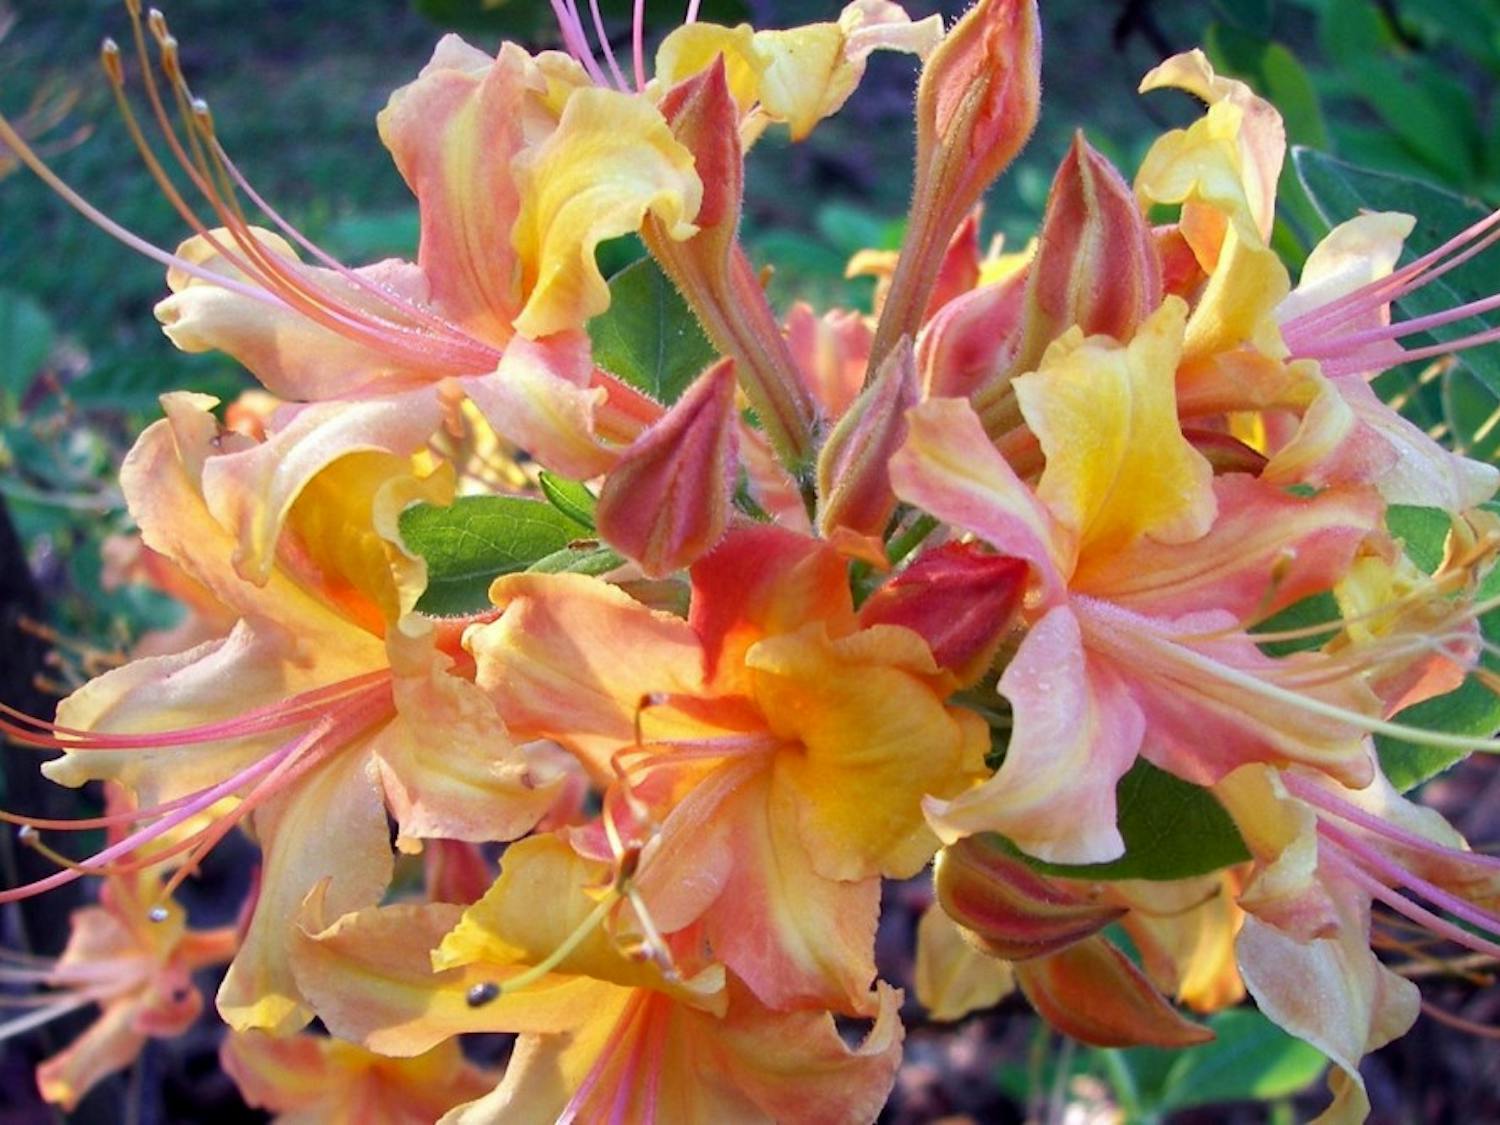 The Donald E. Davis Arboretum 2017 fall plant sale features the Auburn Azalea series, a collection of hybrid native azaleas that come in various colors, including multiple shades of orange.